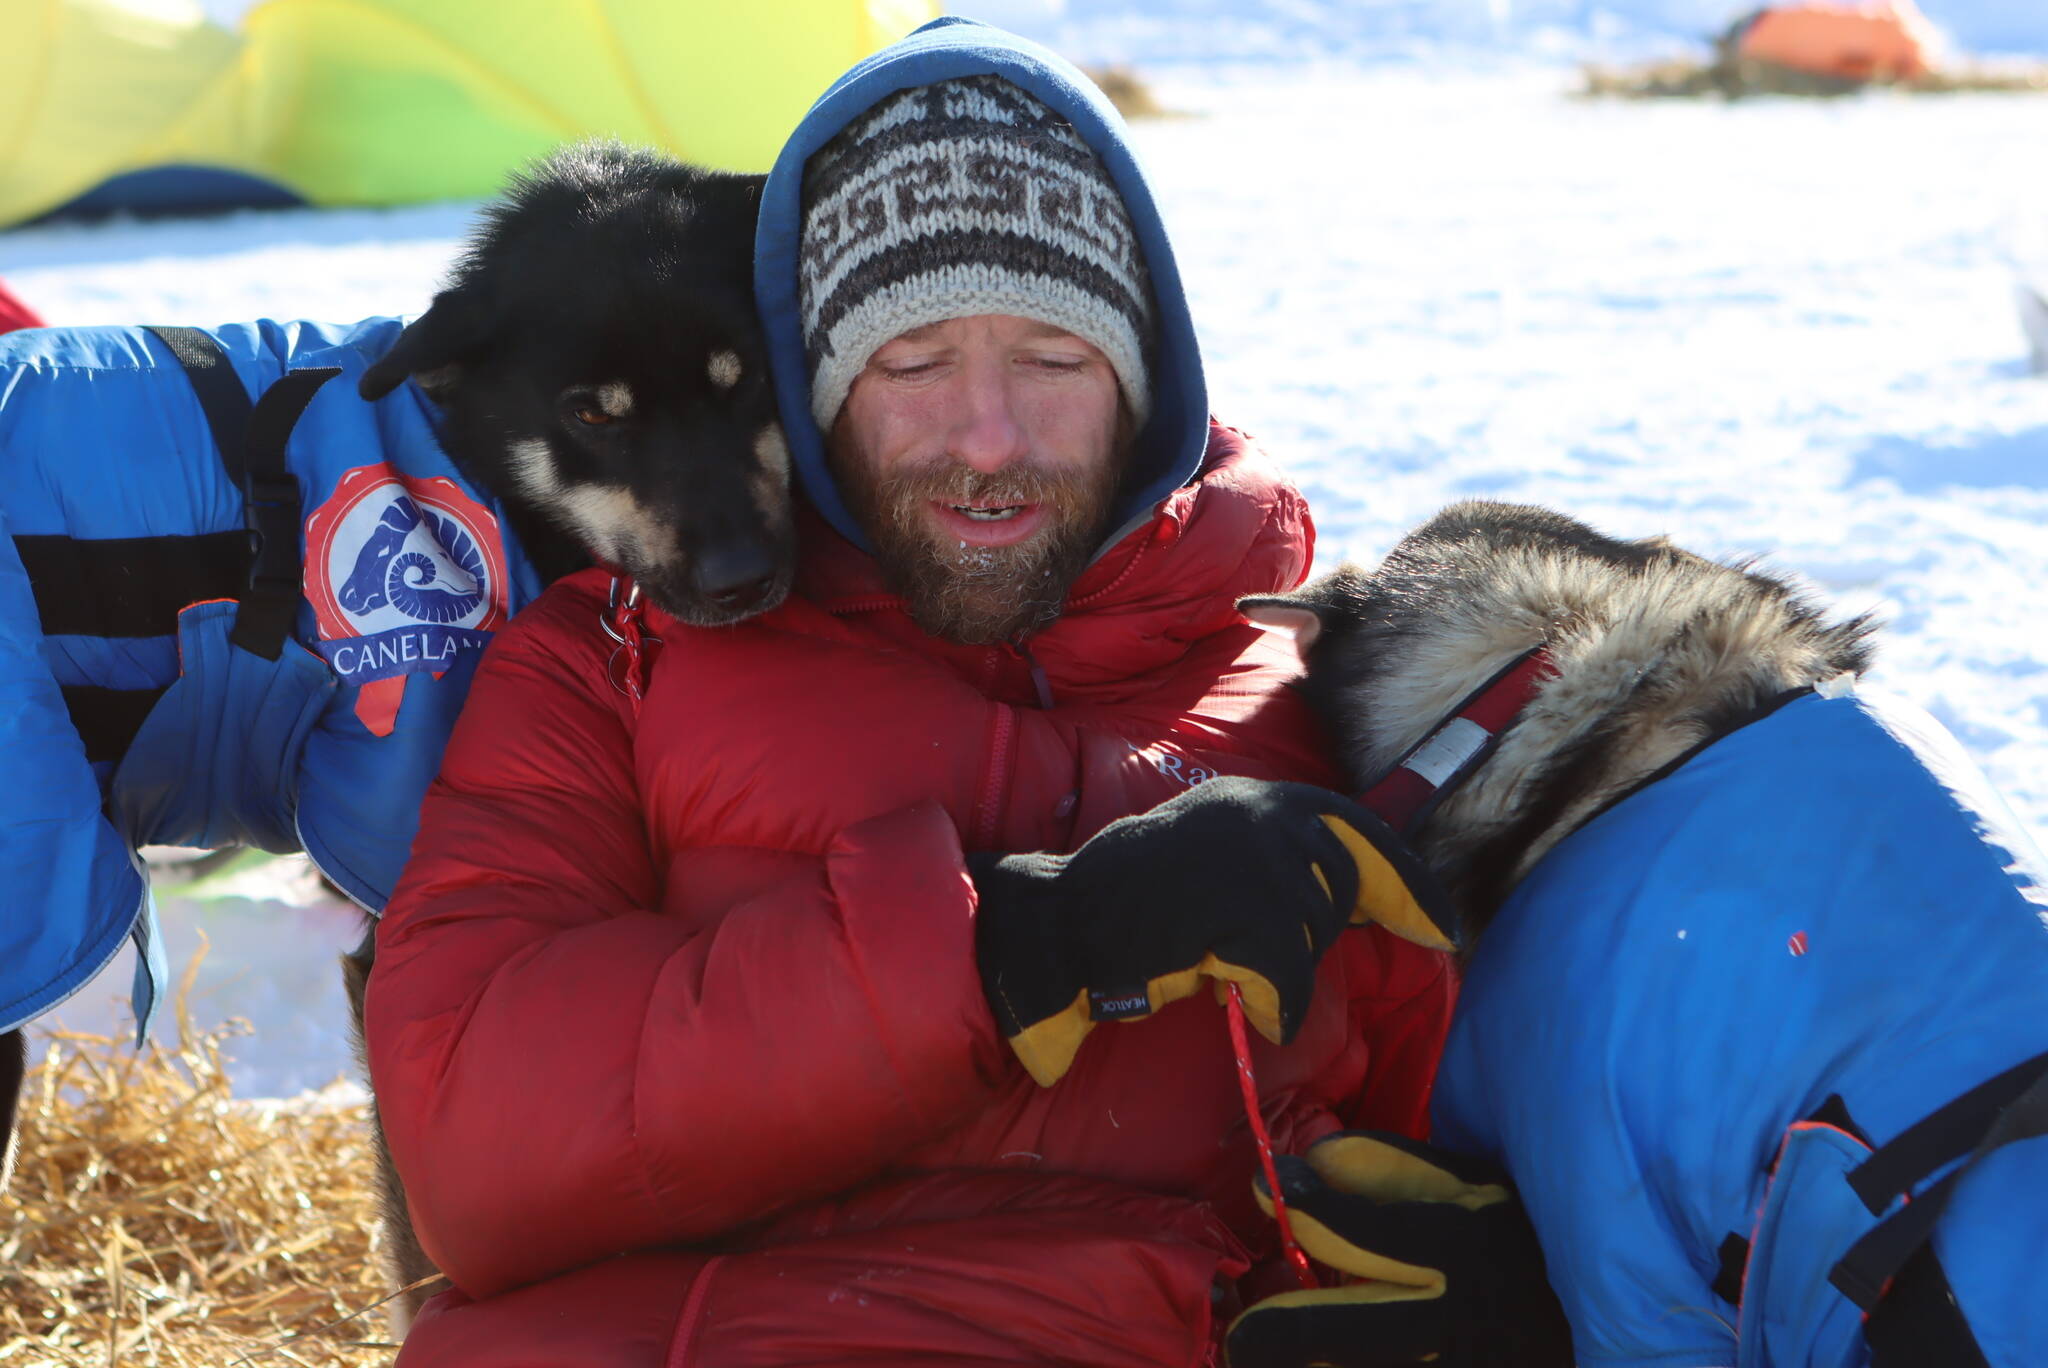 Jessie Holmes takes a break from cooking his dogs a meal to nuzzle with two wheel dogs at the Ophir checkpoint during the Iditarod Trail Sled Dog Race on Wednesday, March 10, 2021. A pack of sled dogs belonging to Holmes, Iditarod veteran and reality TV star killed a family pet in Alaska, officials said. Authorities in Wasilla are investigating a March 30, 2022 incident involving dogs owned by musher Holmes, who finished third in year’s Iditarod Trail Sled Dog Race and stars in “Life Below Zero: Alaska” on the National Geographic channel. (Zachariah Hughes/Anchorage Daily News via AP, Pool, File)